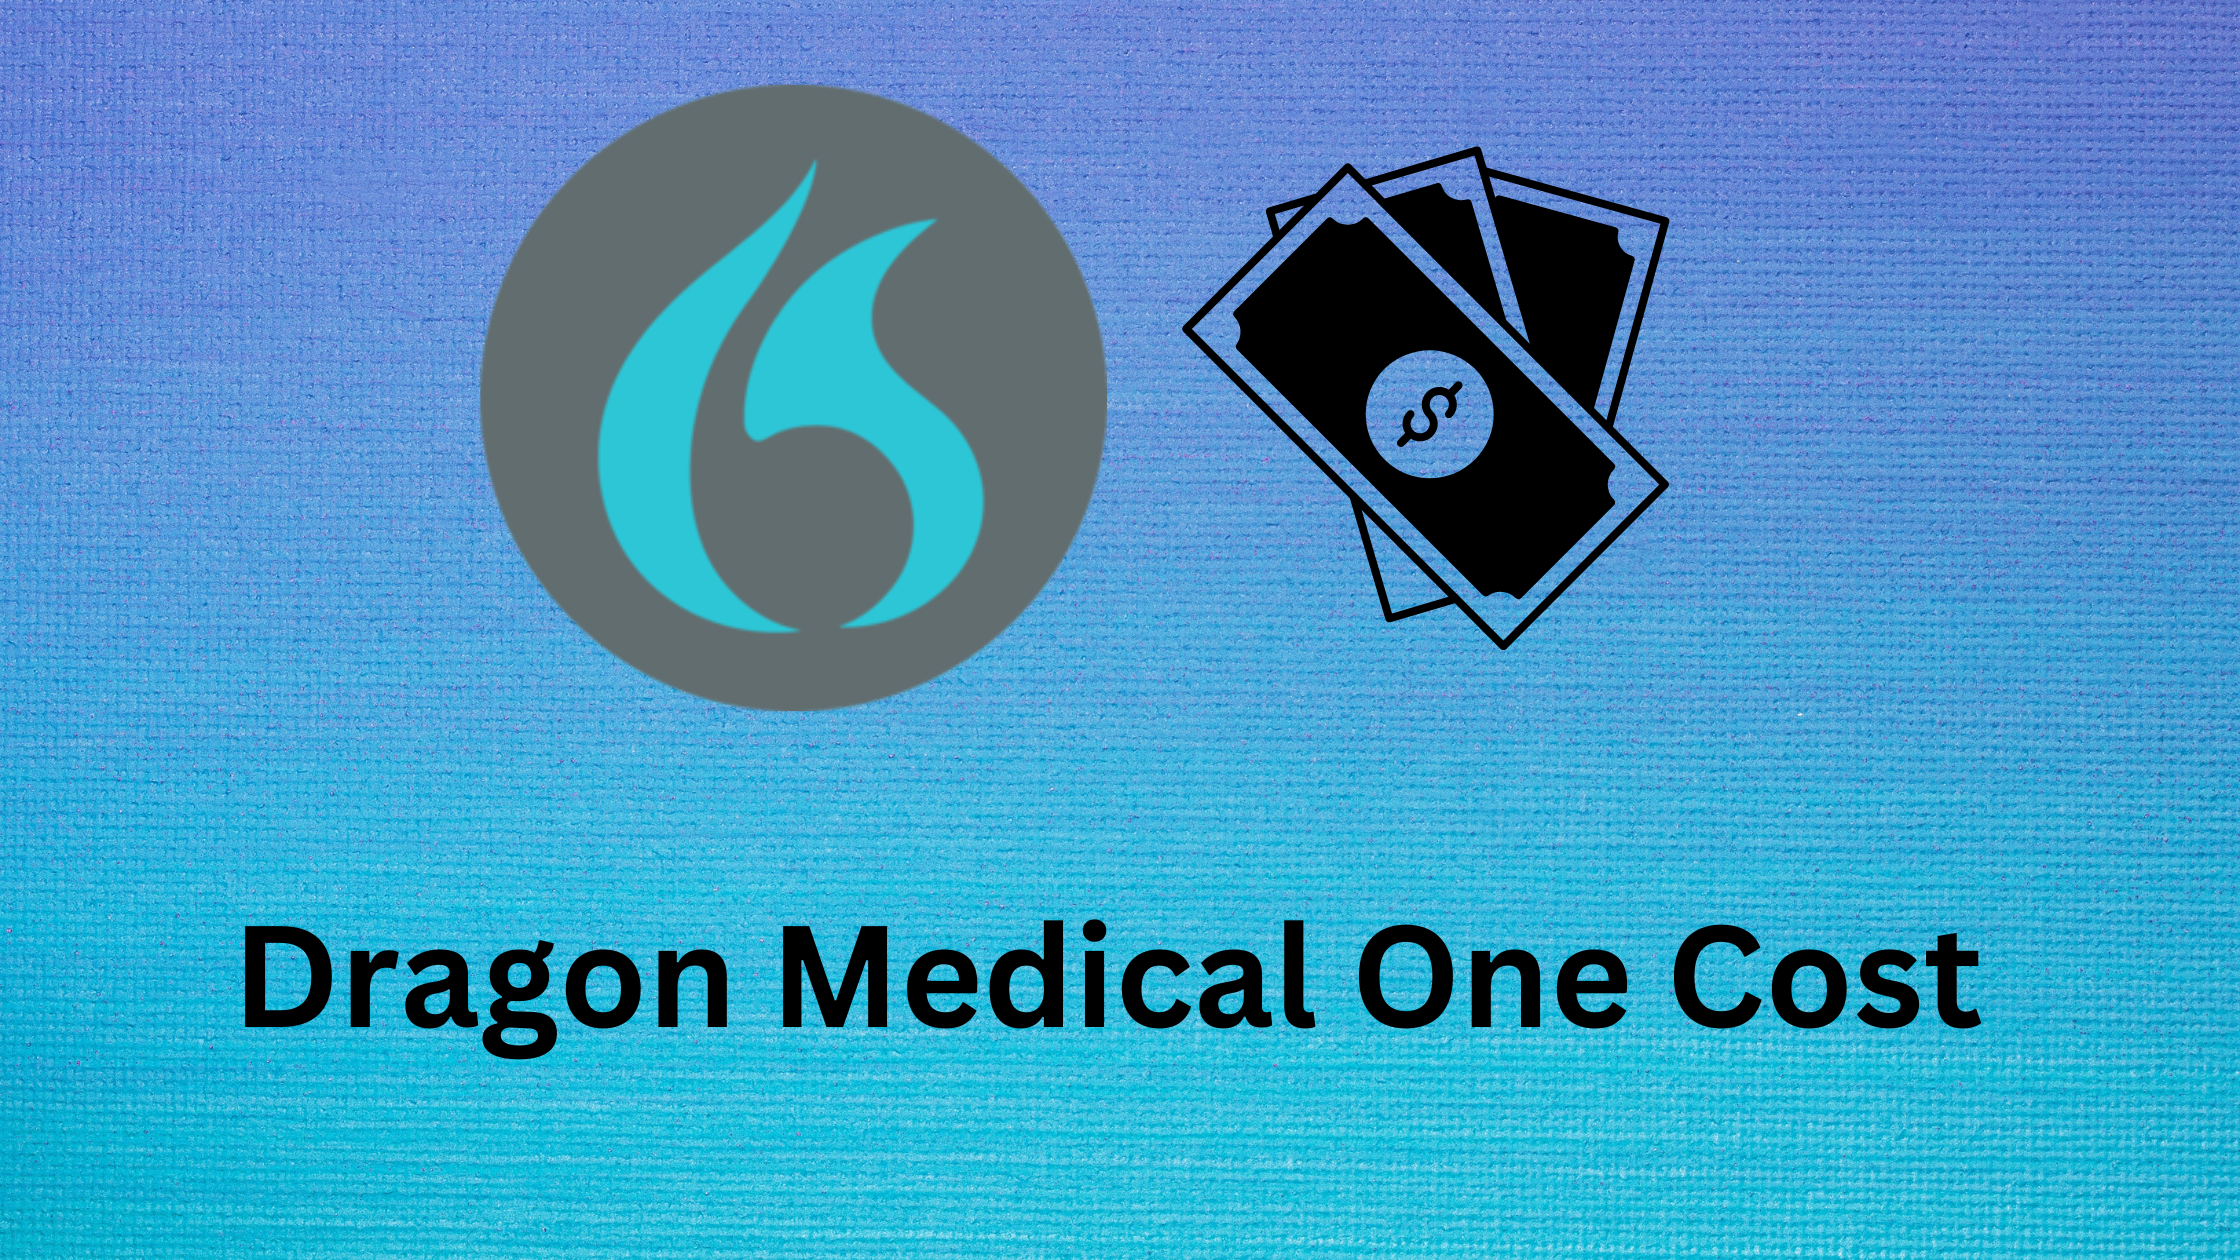 Dragon Medical One Cost